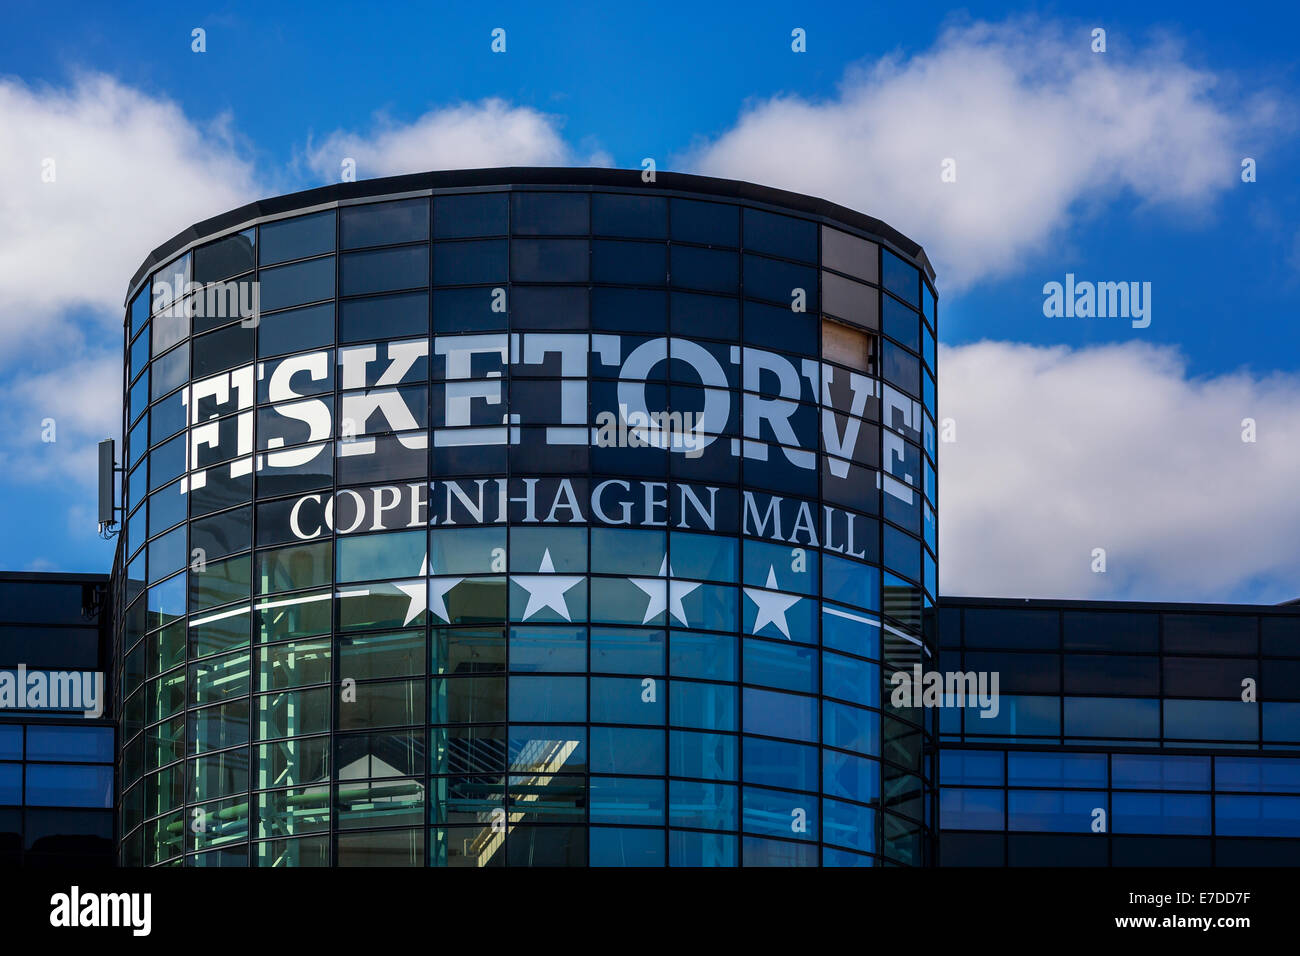 Modern Architecture Shopping Malls High Resolution Stock Photography and  Images - Alamy